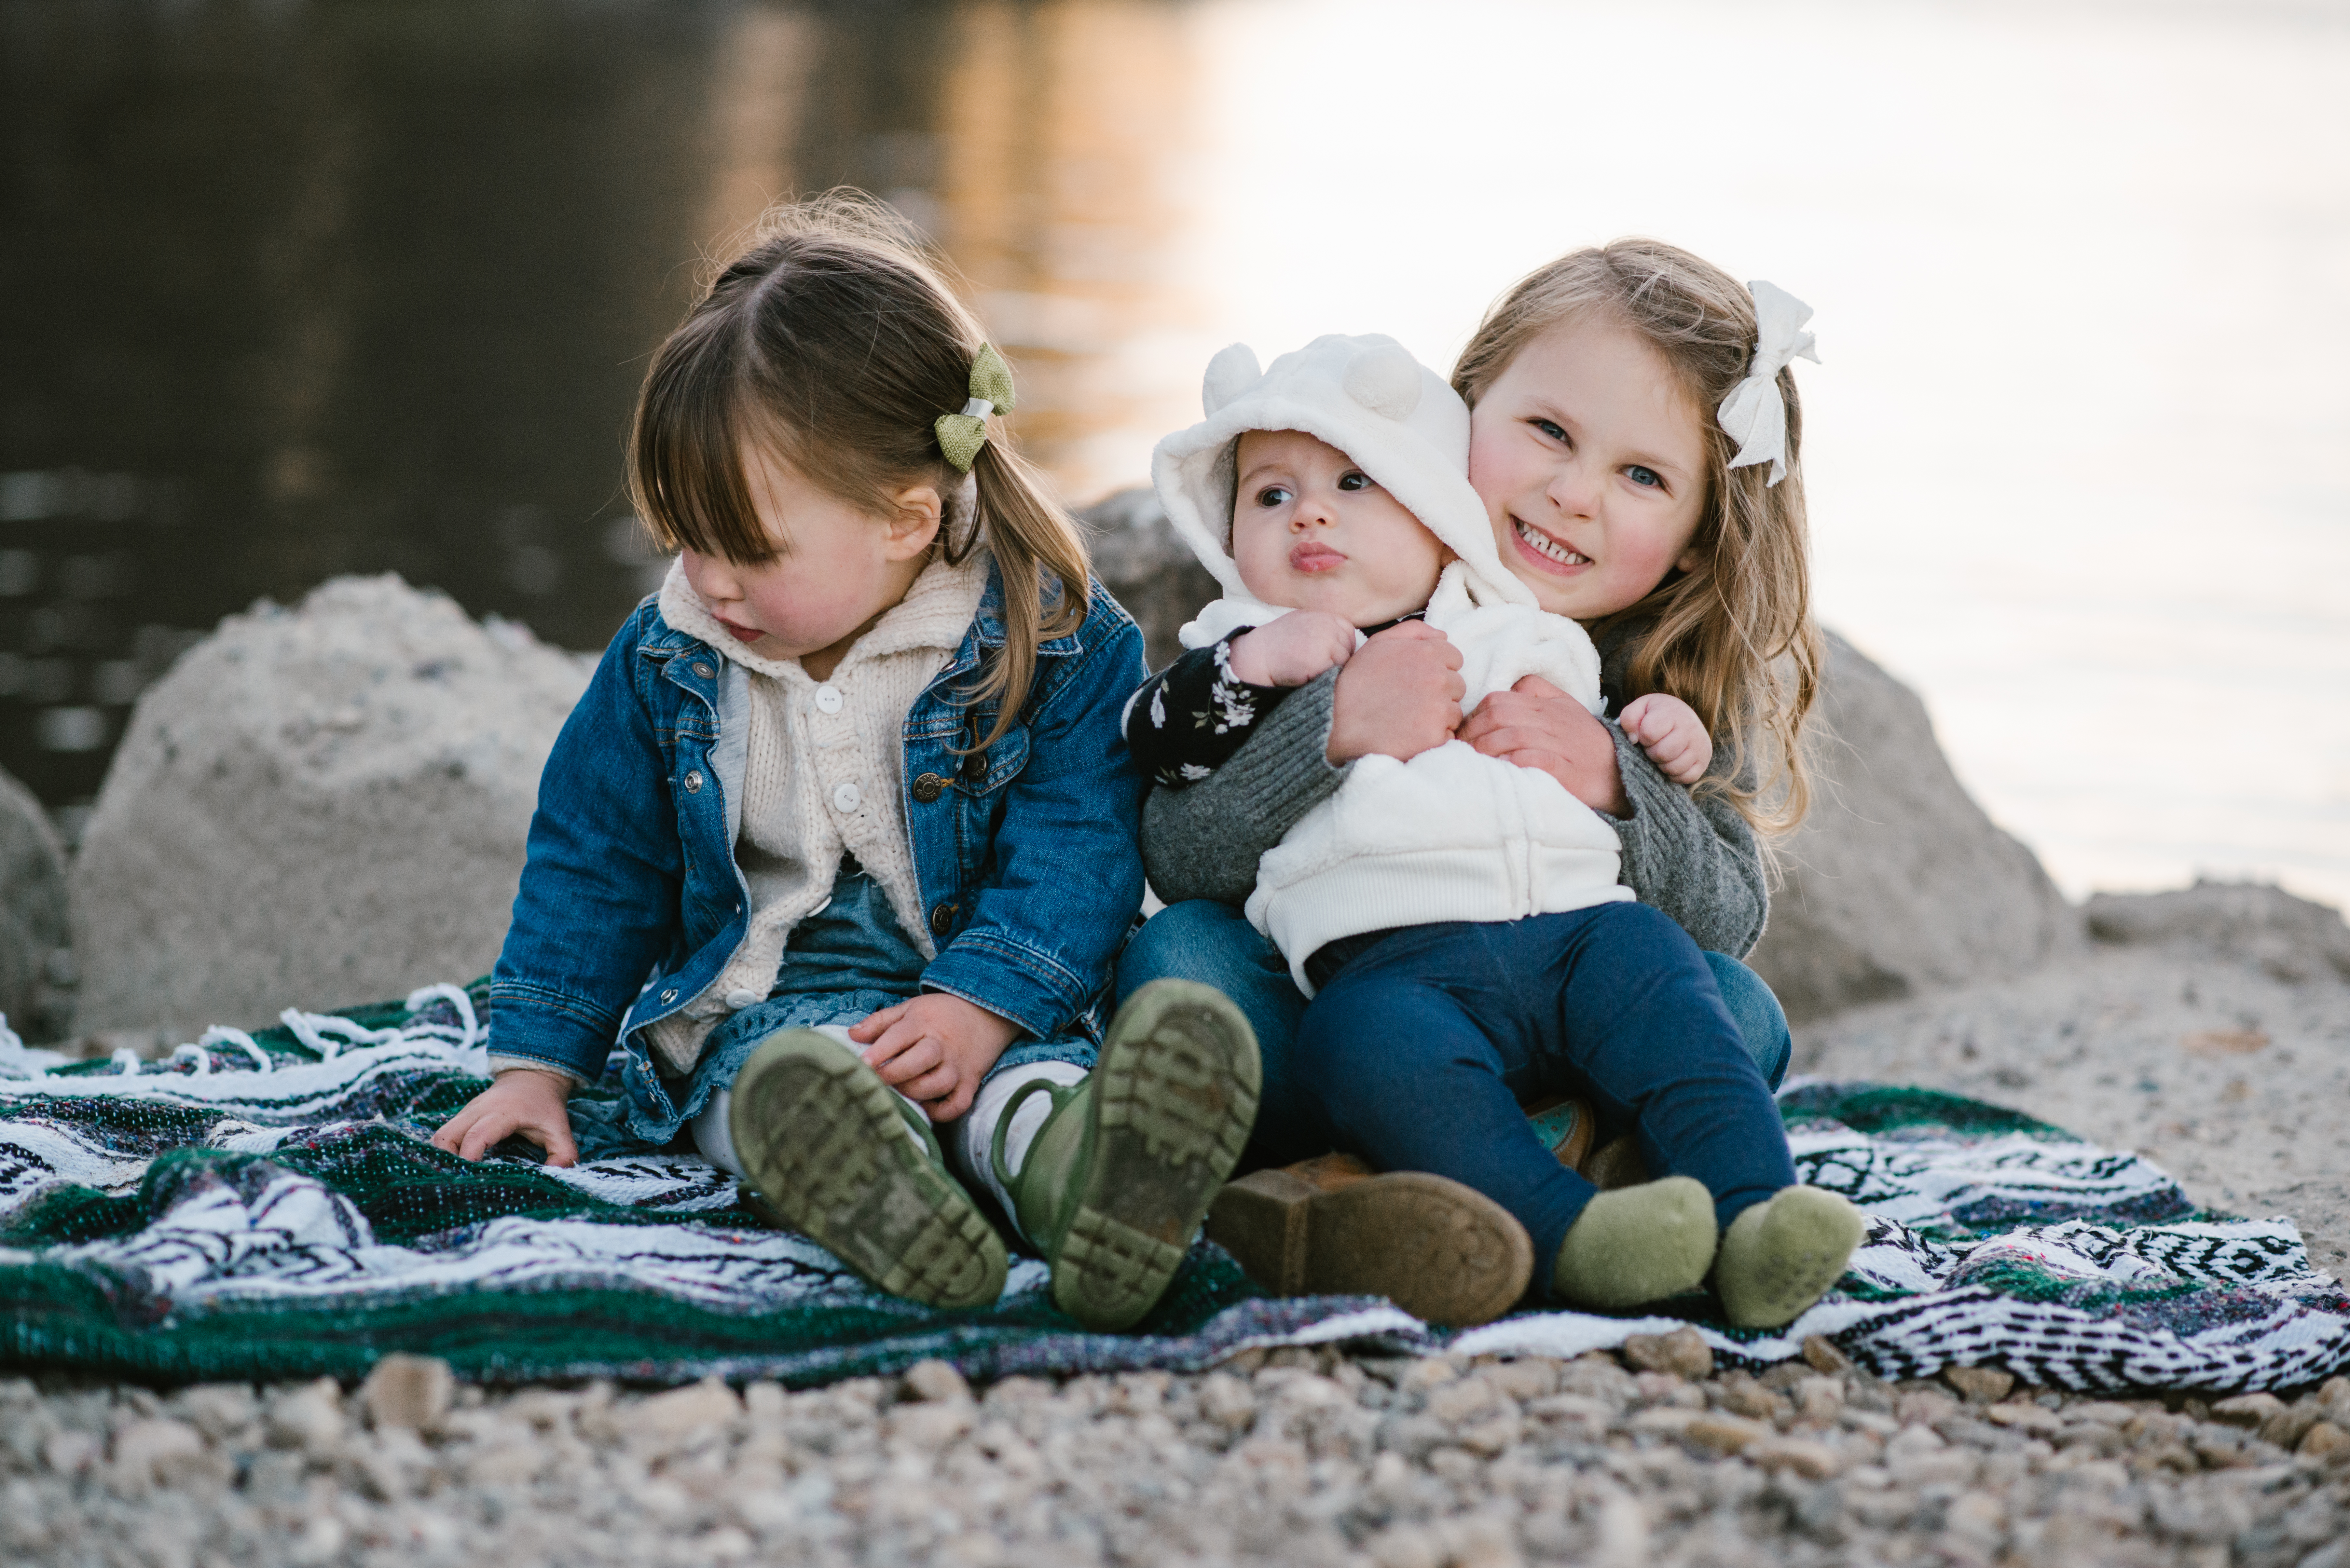 Sibbling cuddlesat a Family Session at Lake Cuyamaca by Kylie Rae Photography